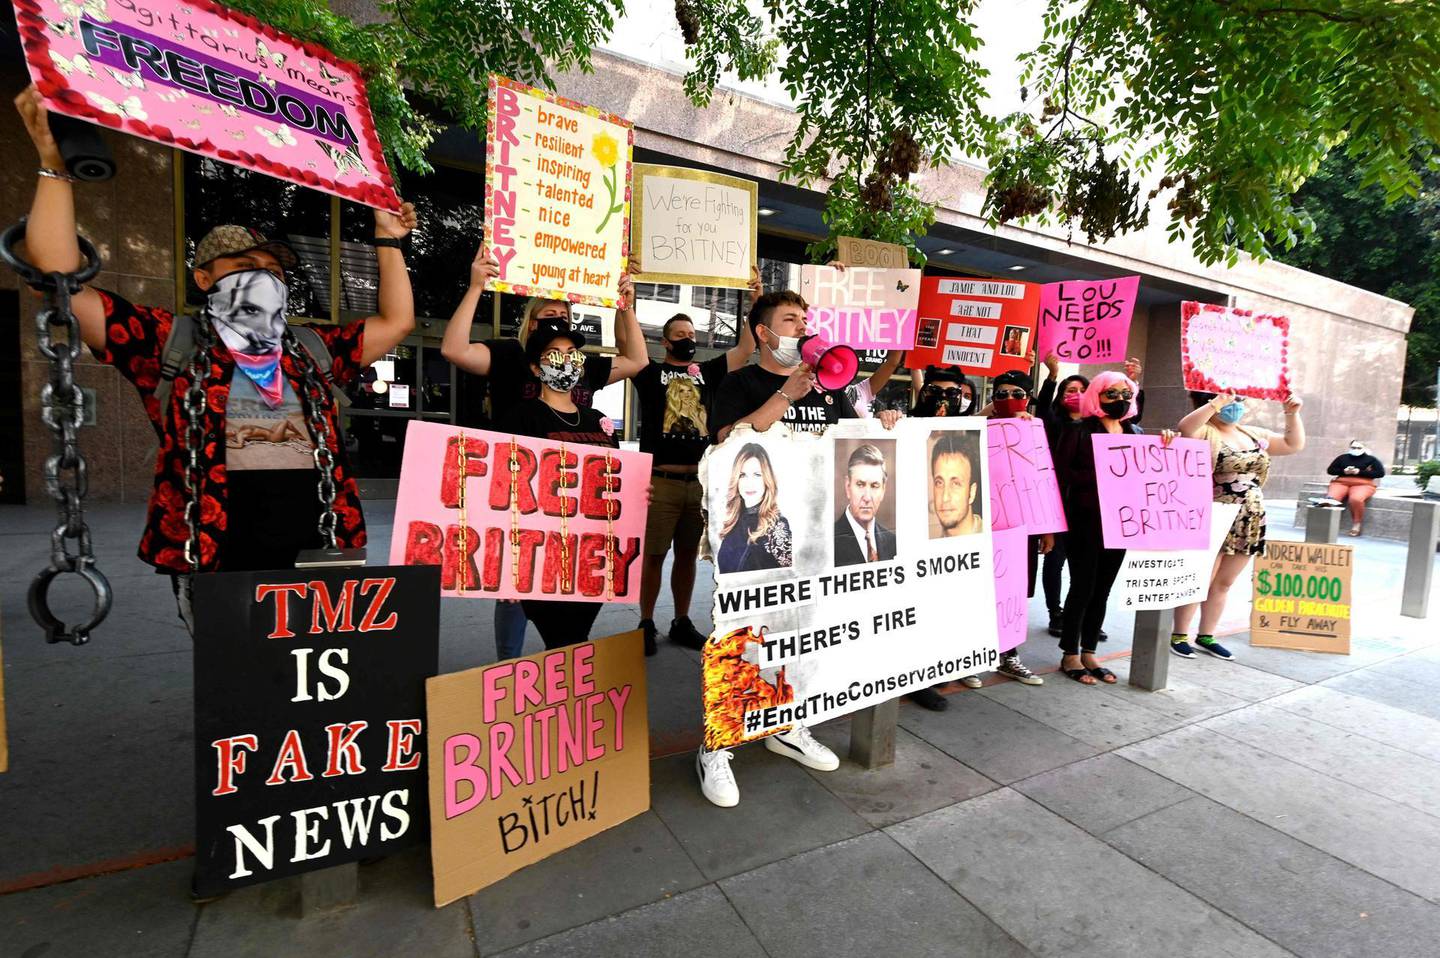 (FILES) In this file photo taken on September 16, 2020 Supporters of Britney Spears end the conservatorship court case attend the #FreeBritney Protest outside Los Angeles Courthouse at Stanley Mosk Courthouse on in Los Angeles, California. the legal agreement barring Britney Spears from managing her own life and finances is now older than the pop star was when the public met her as an effervescent 12-year-old on the Disney Channel -- and controversy over who steers her life is starting to boil. Spears, 39, has lived under the strict arrangement since her infamous unraveling, which in 2008 led a California court to place her under a unique legal guardianship largely governed by her father, Jamie. / AFP / GETTY IMAGES NORTH AMERICA / Frazer Harrison
